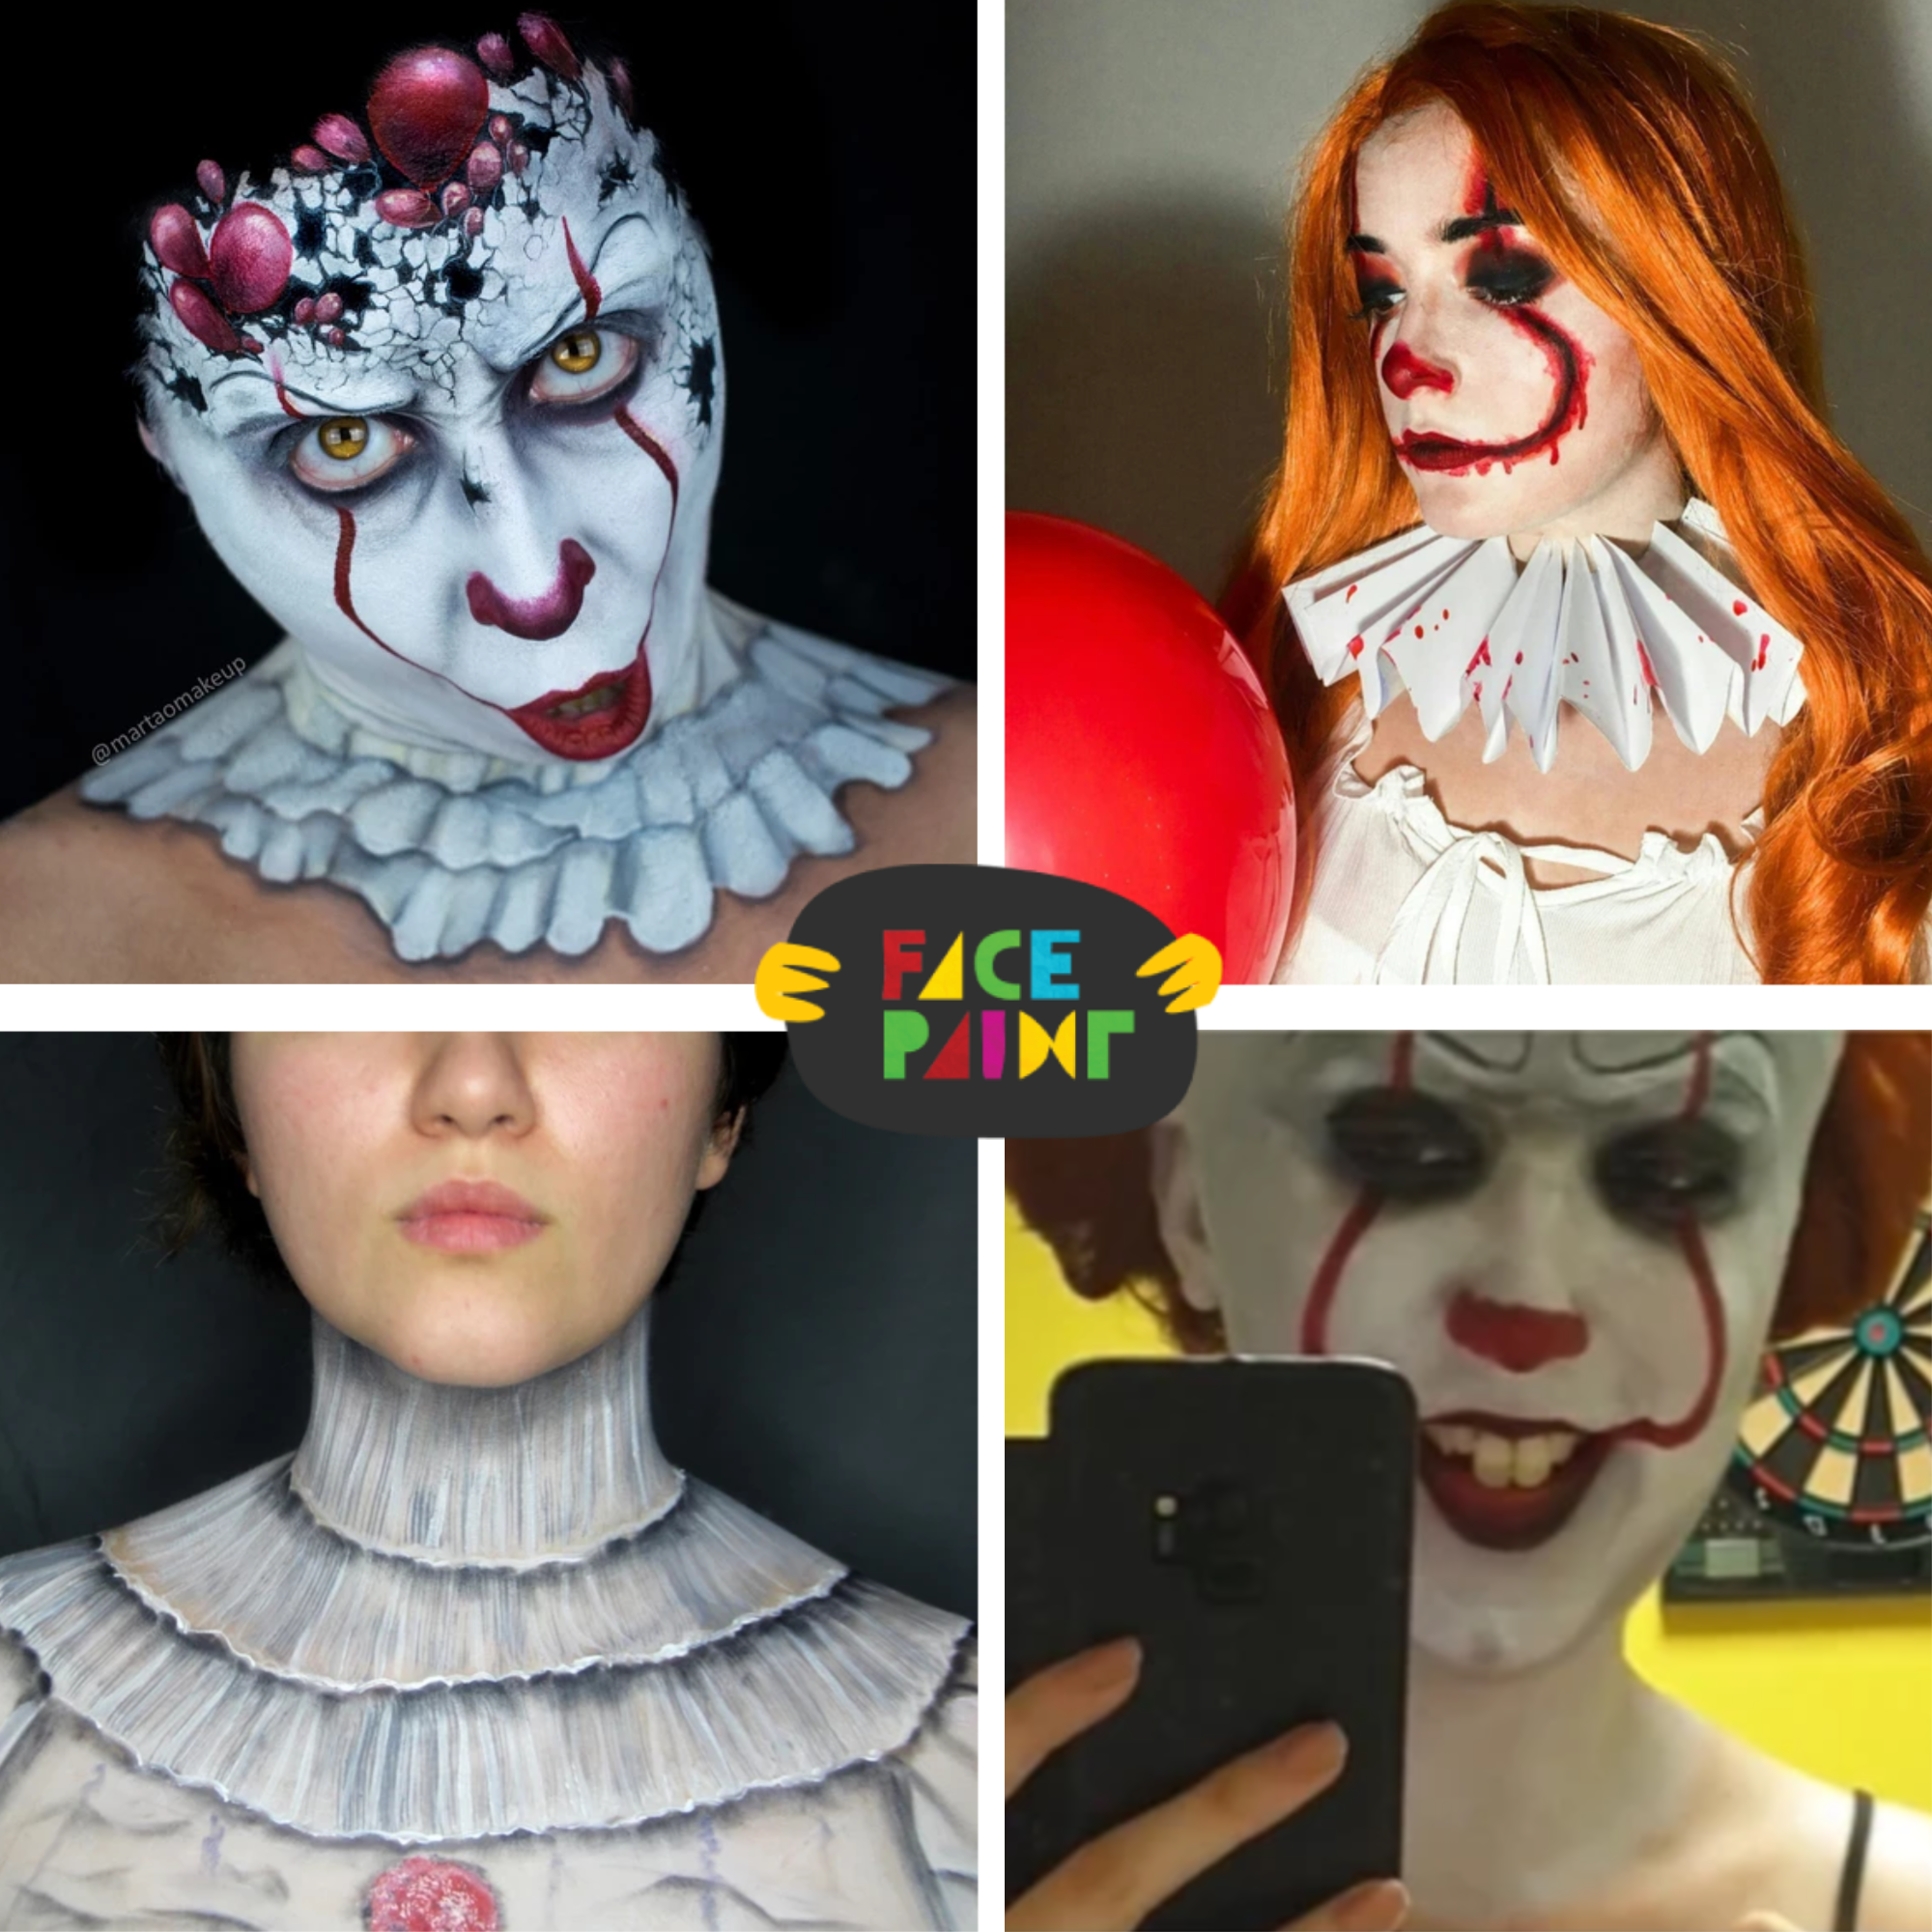 Top 4 Pennywise Makeup Tutorials and Videos: Pennywise Face Paint Designs